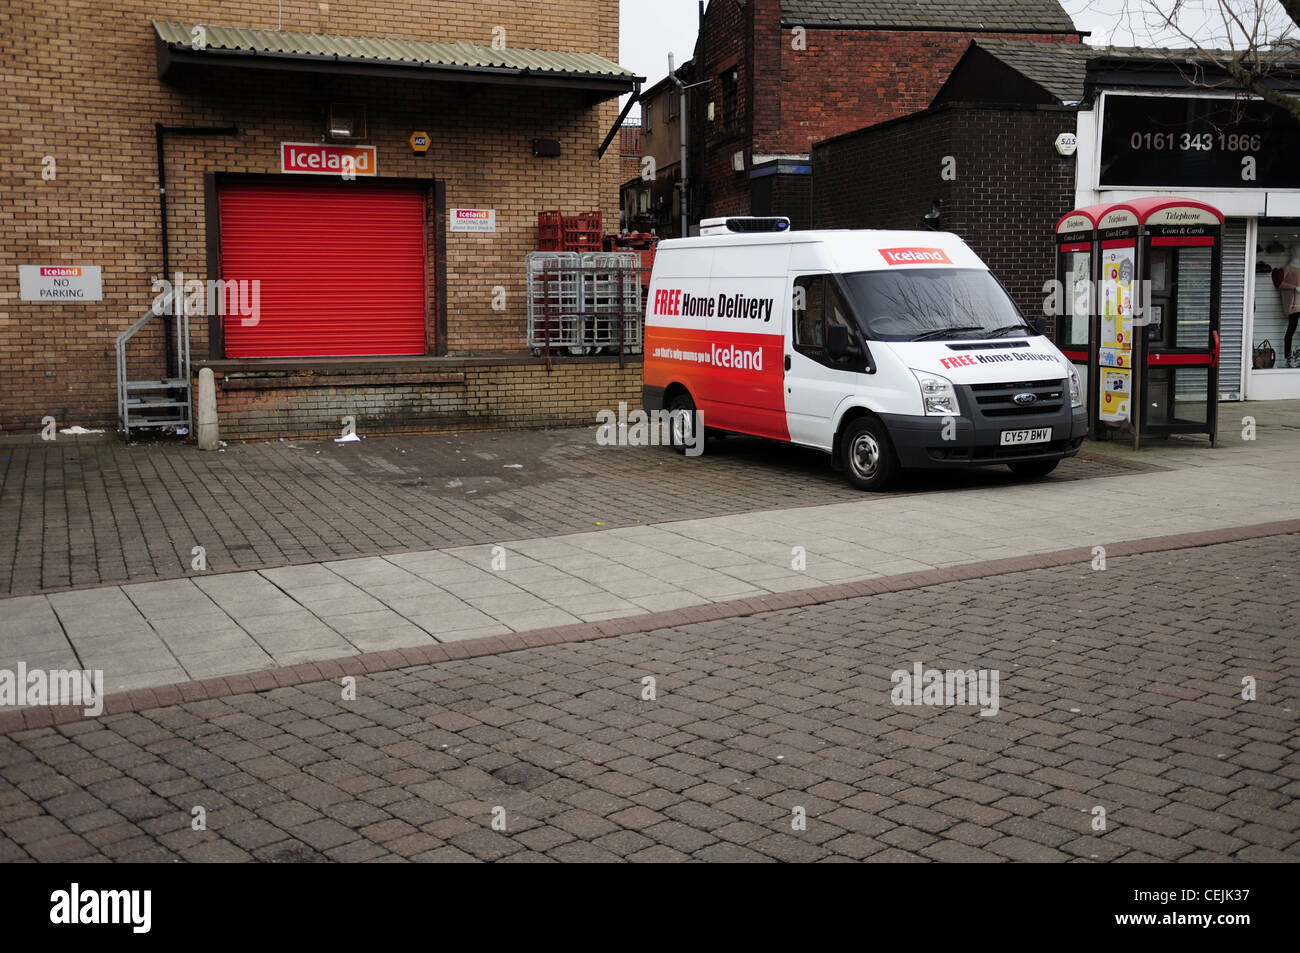 'Iceland' Store rear loading bay home delivery van parked up outside Stock Photo